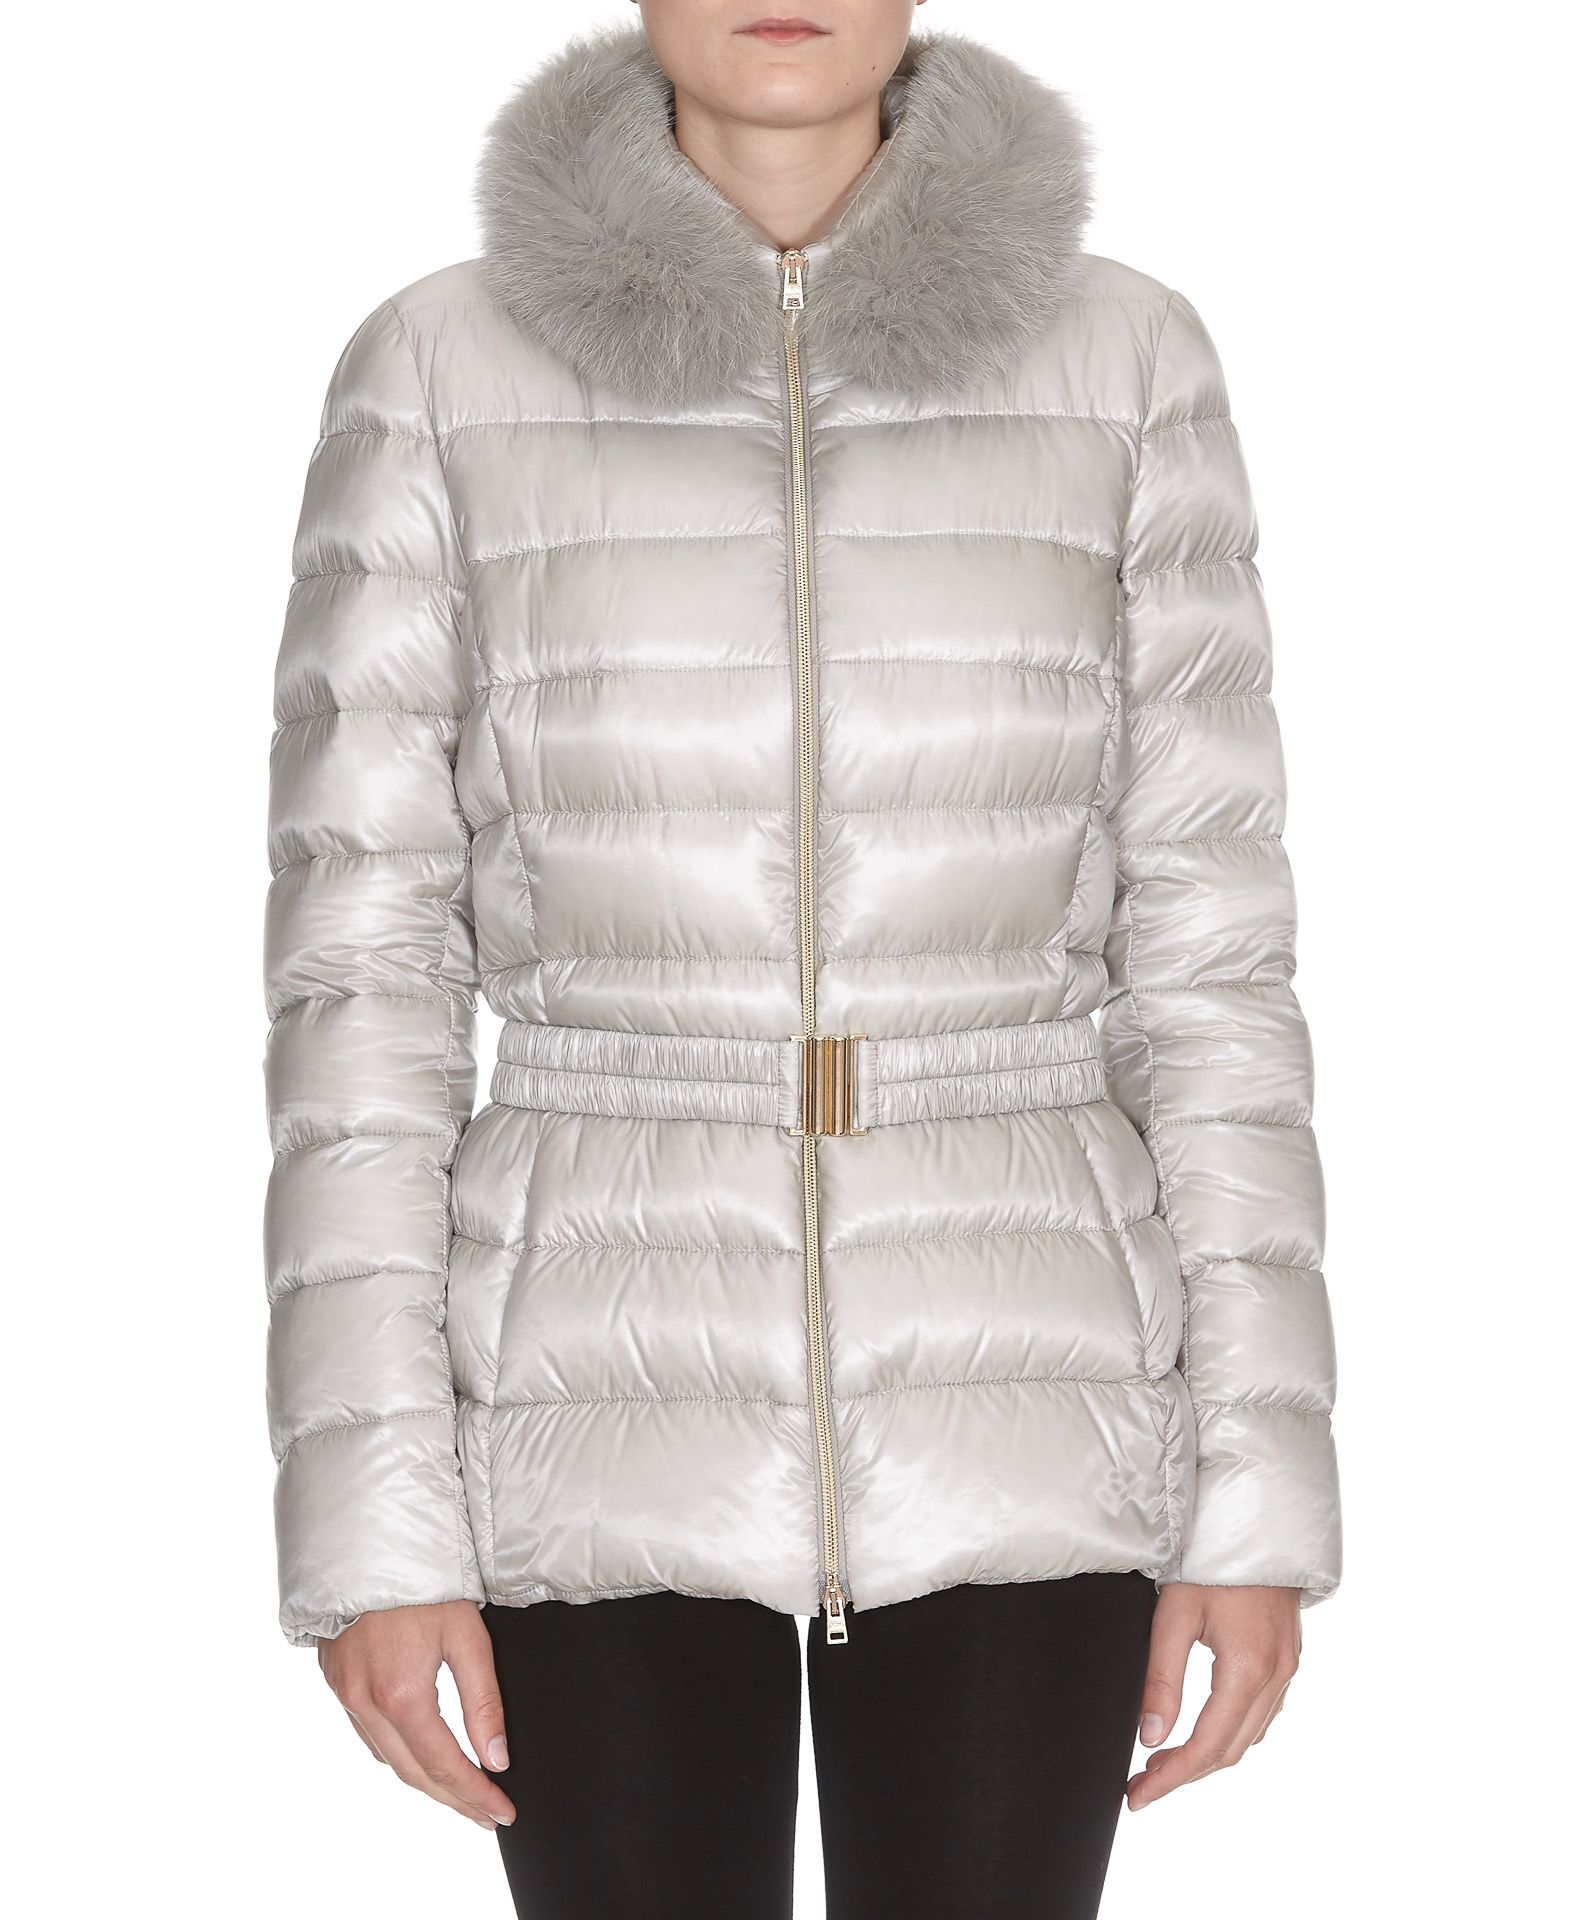 italist | Best price in the market for Herno Herno Iconico Down Jacket ...